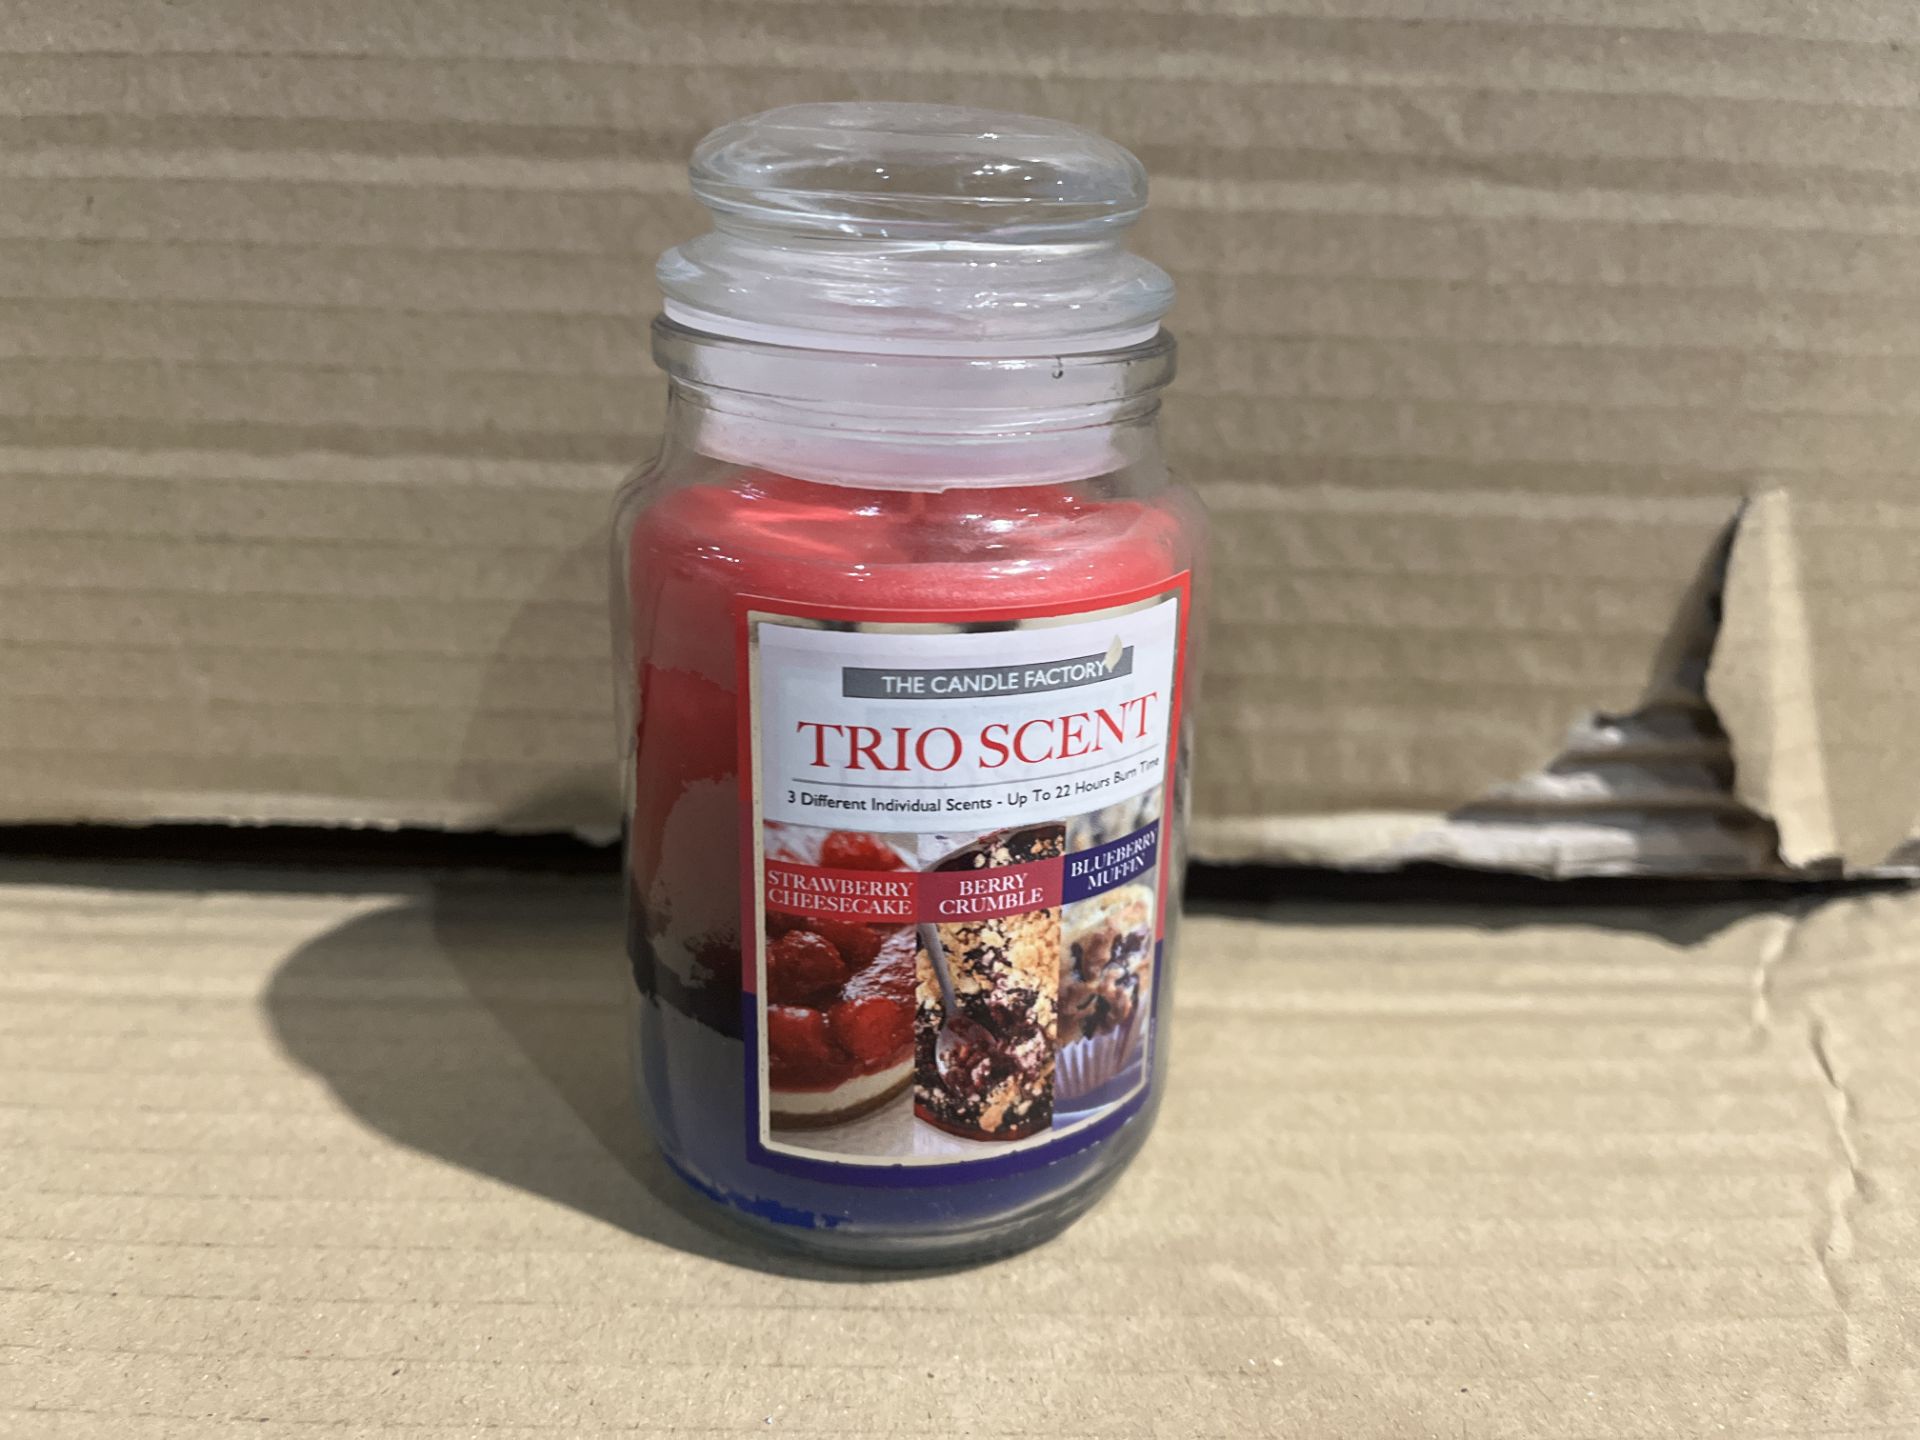 20 X BRAND NEW THE CANDLE FACTORY TRI SCENT 5OZ CANDLES R9B